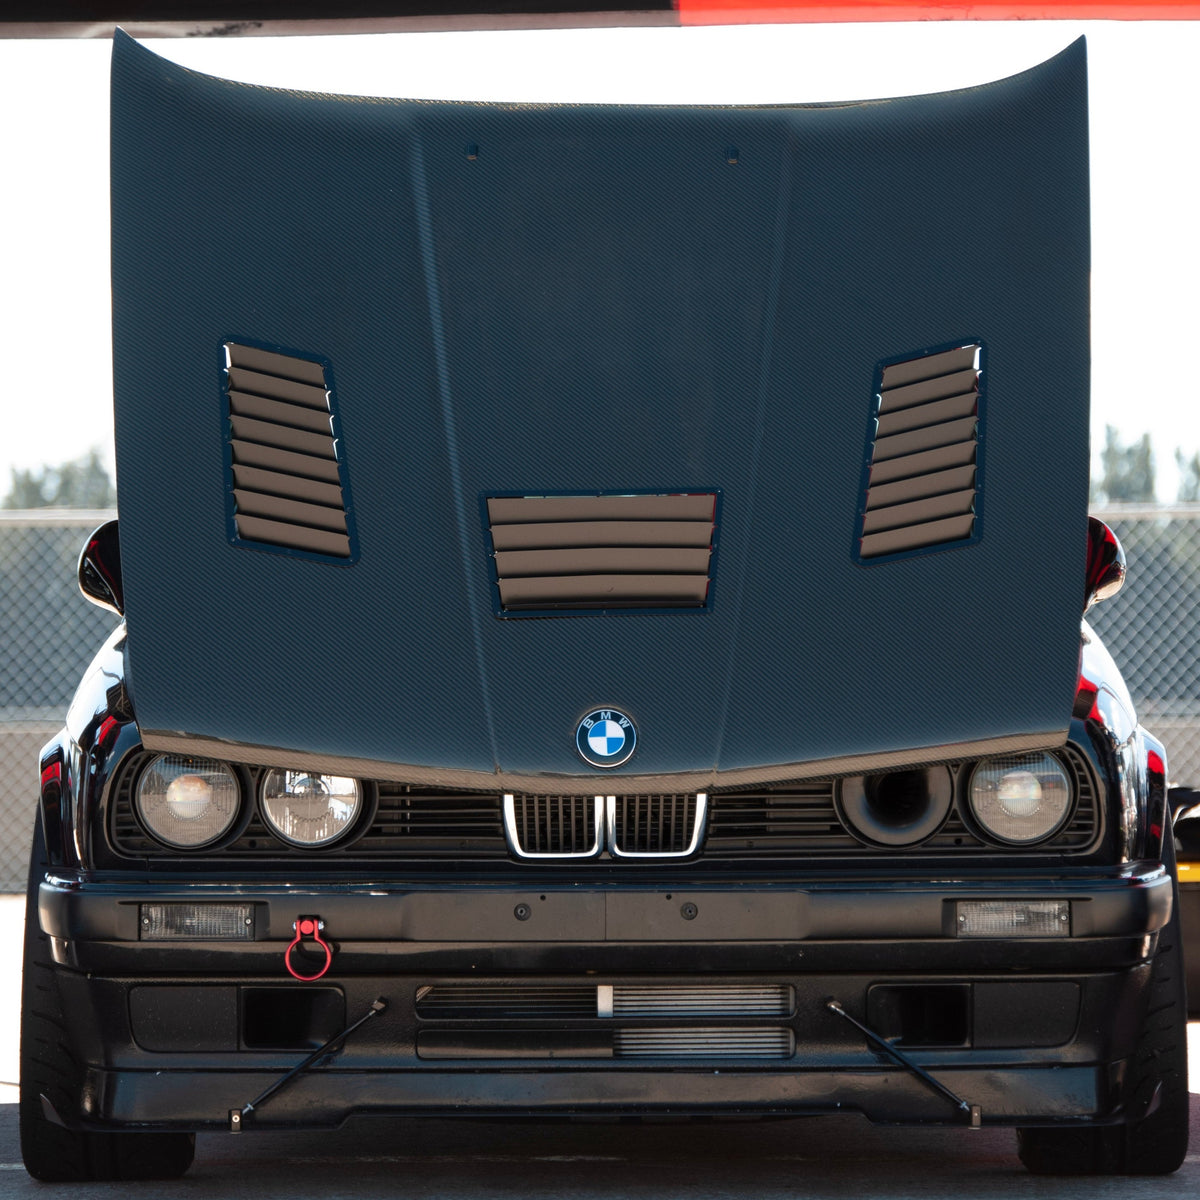 All About the BMW E30  BMW E30 in Racing & Notable Models — Condor Speed  Shop